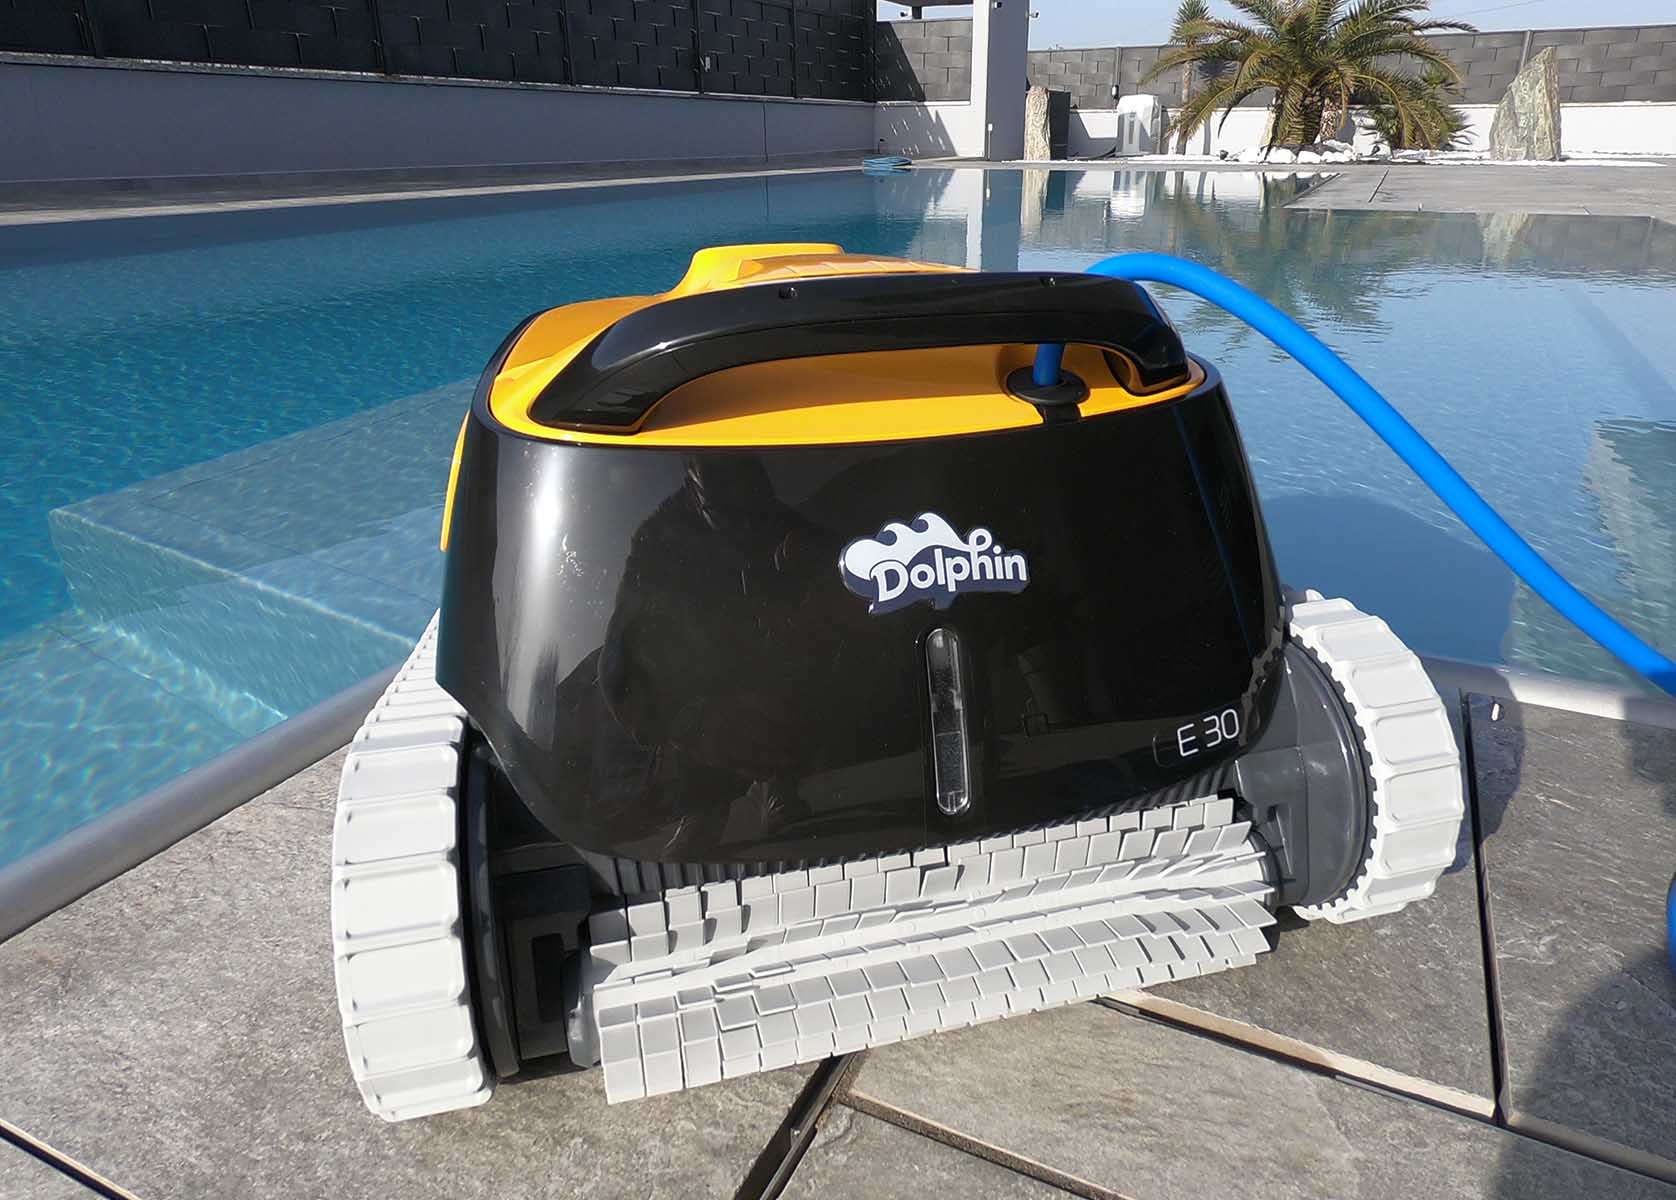 Dolphin E30 pool robot for medium size pools